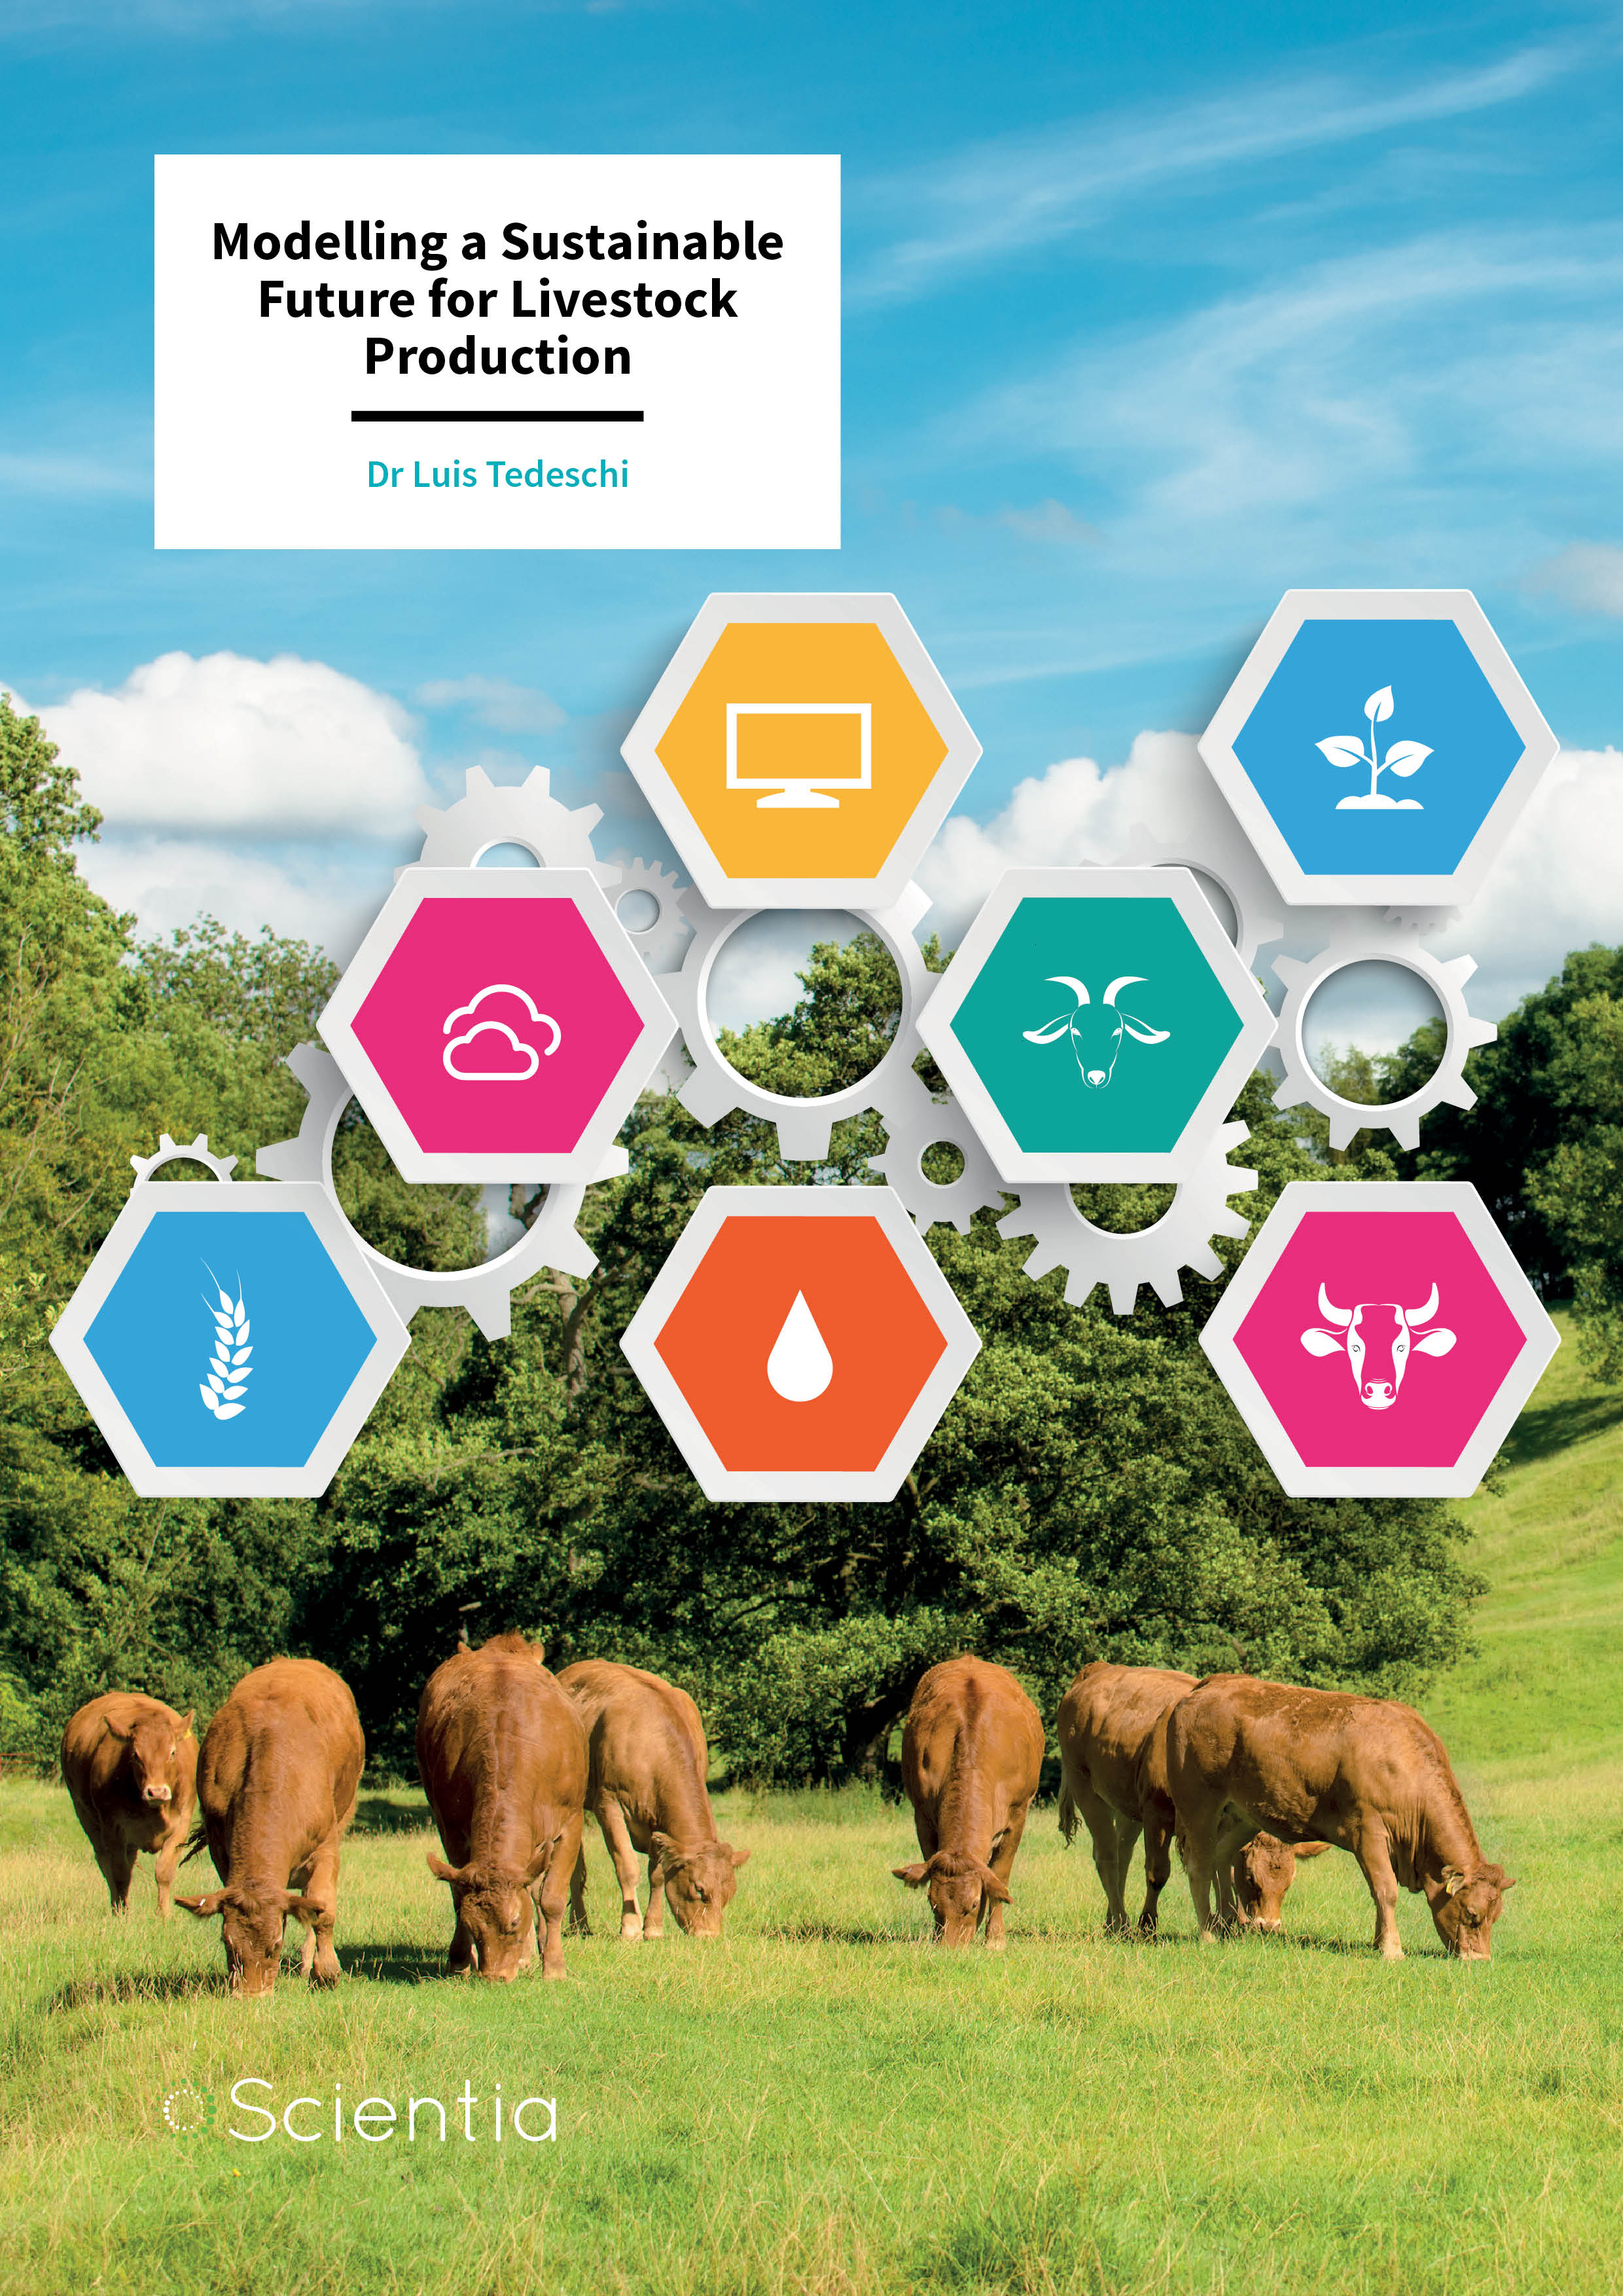 Dr Luis Tedeschi – Modelling a Sustainable Future for Livestock Production